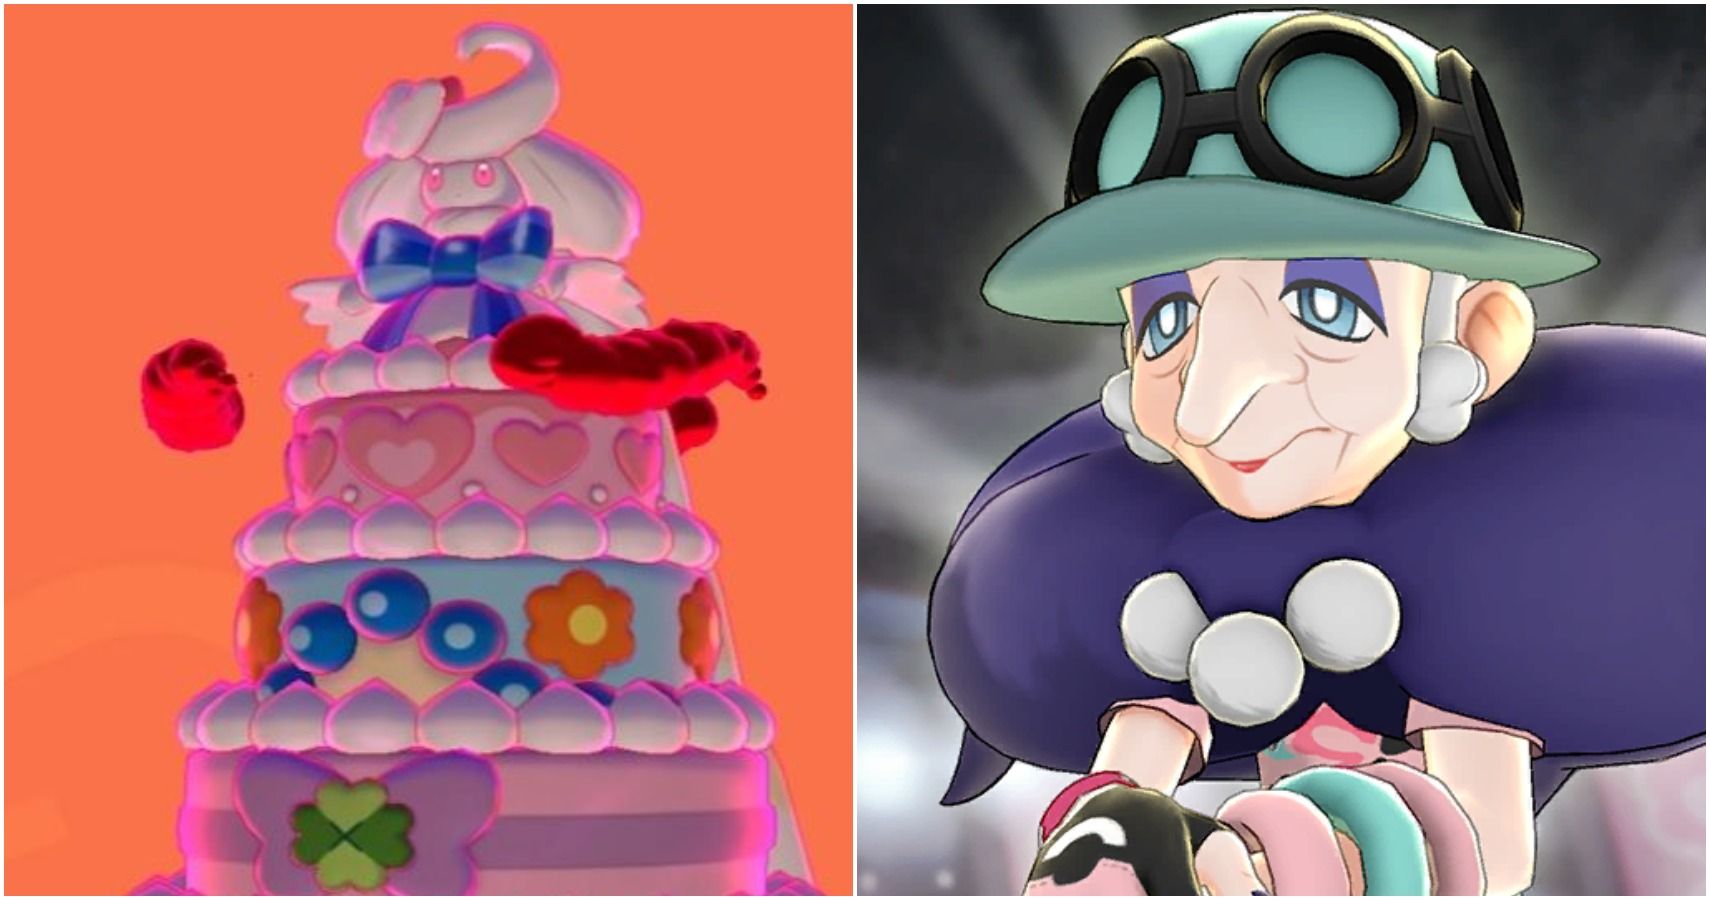 Pokémon Sword and Shield's Opal Is the Gym Leader We Deserve